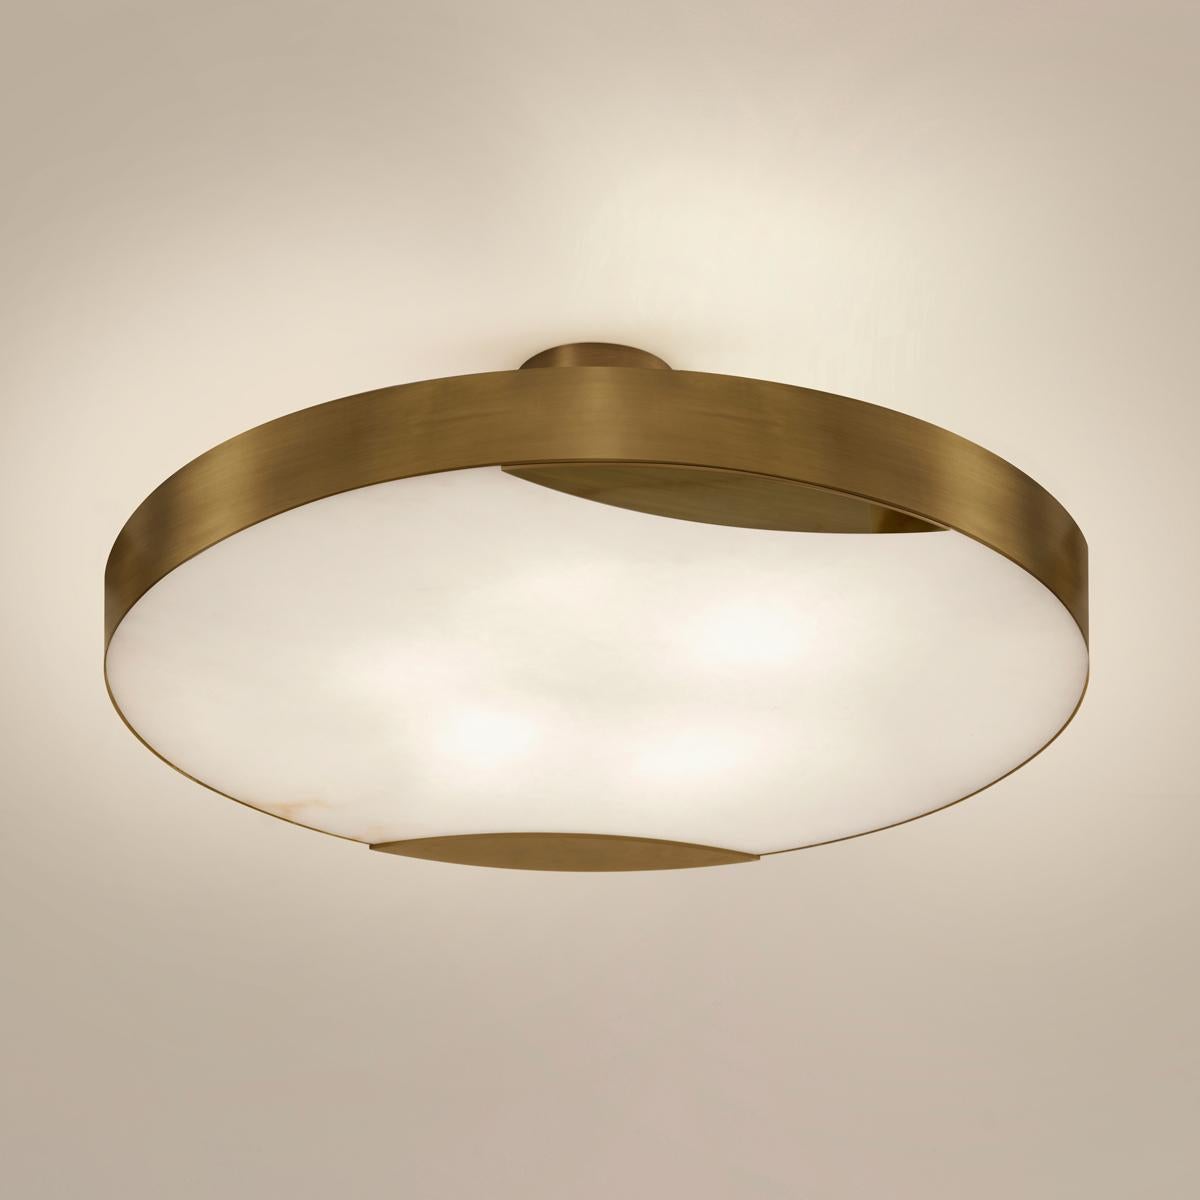 Cloud N.1 Ceiling Light by Gaspare Asaro-Satin Brass Finish In New Condition For Sale In New York, NY